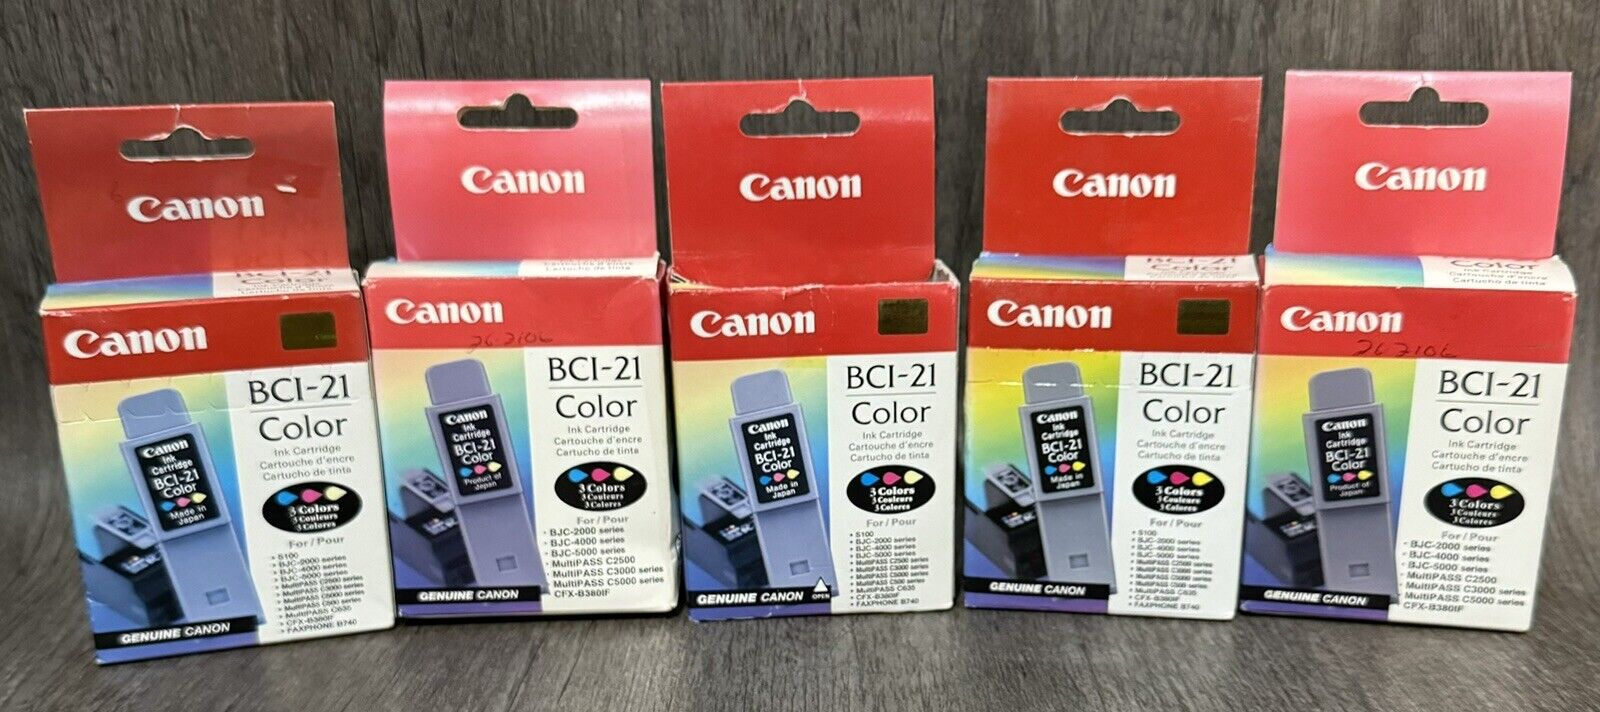 NEW NOS Lot of 5 Genuine CANON BCI-21 COLOR Ink Cartridges EXPIRED